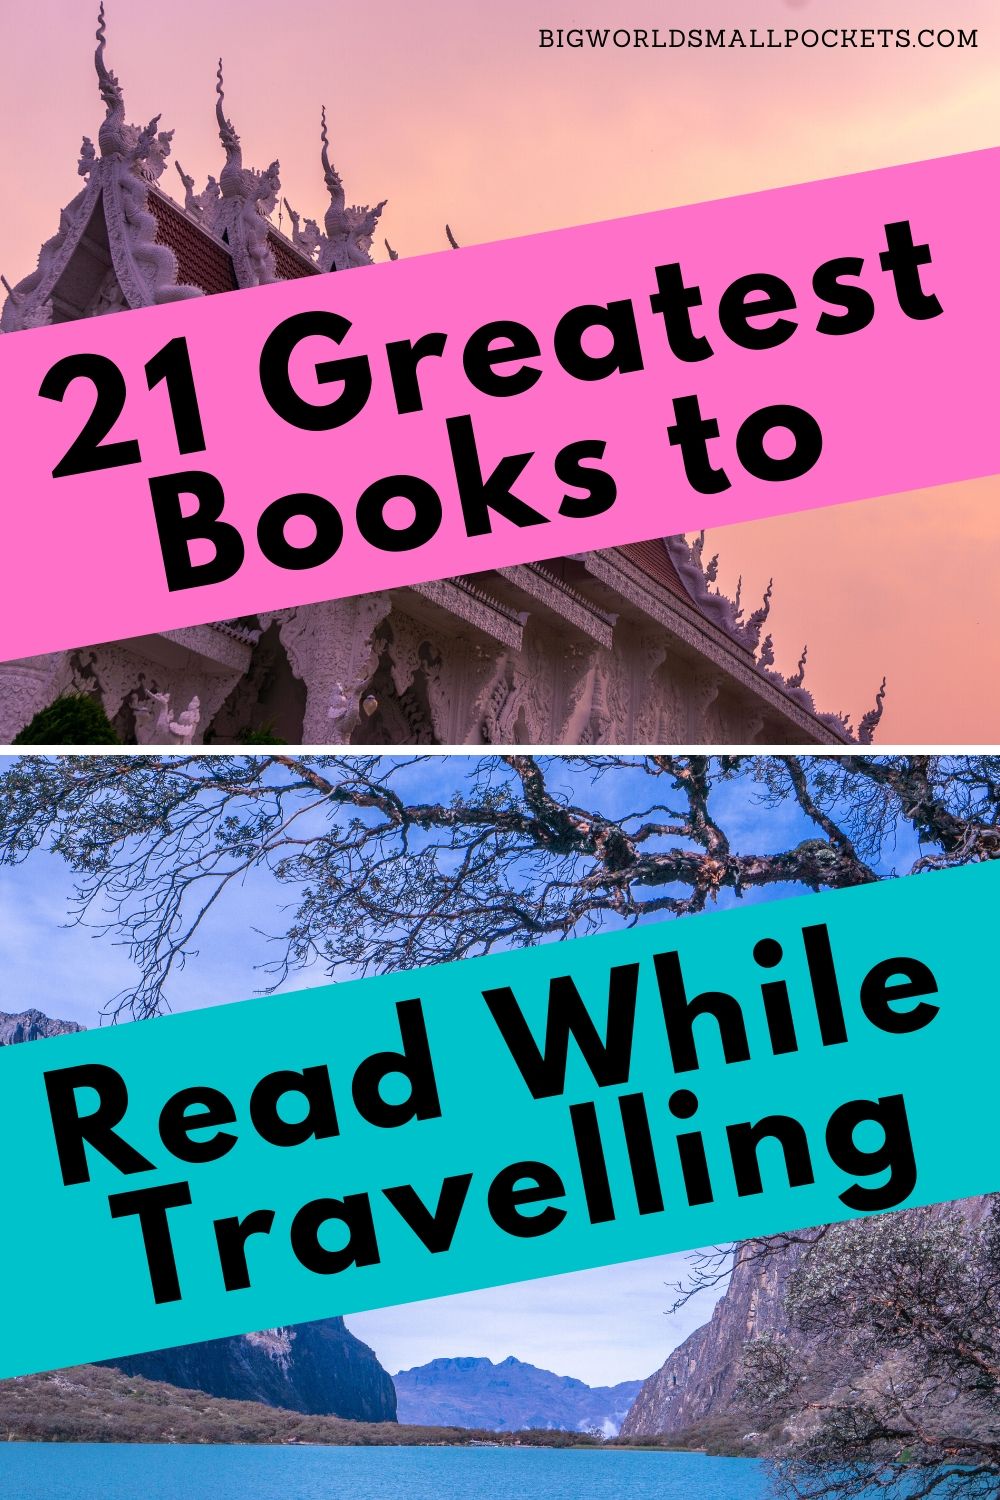 21 Greatest Books to Read While Travelling